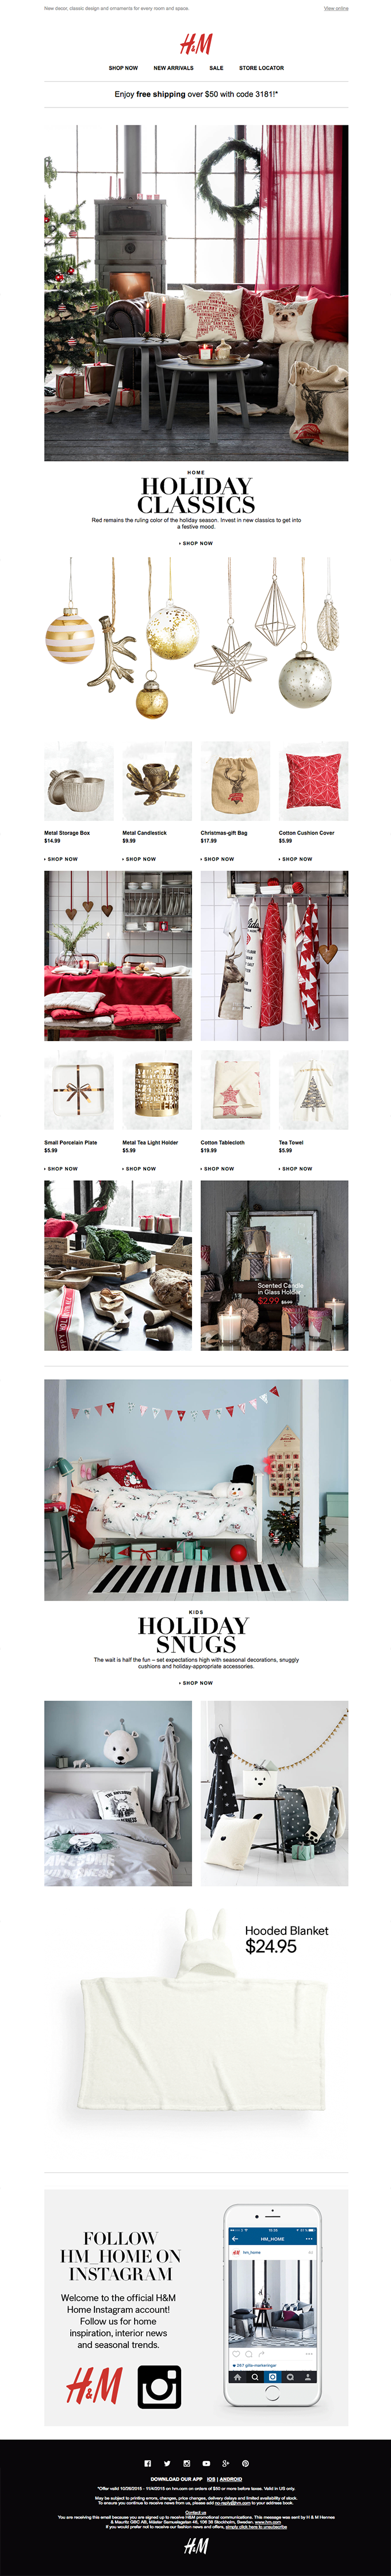 H&M Home- A stylish holiday at home